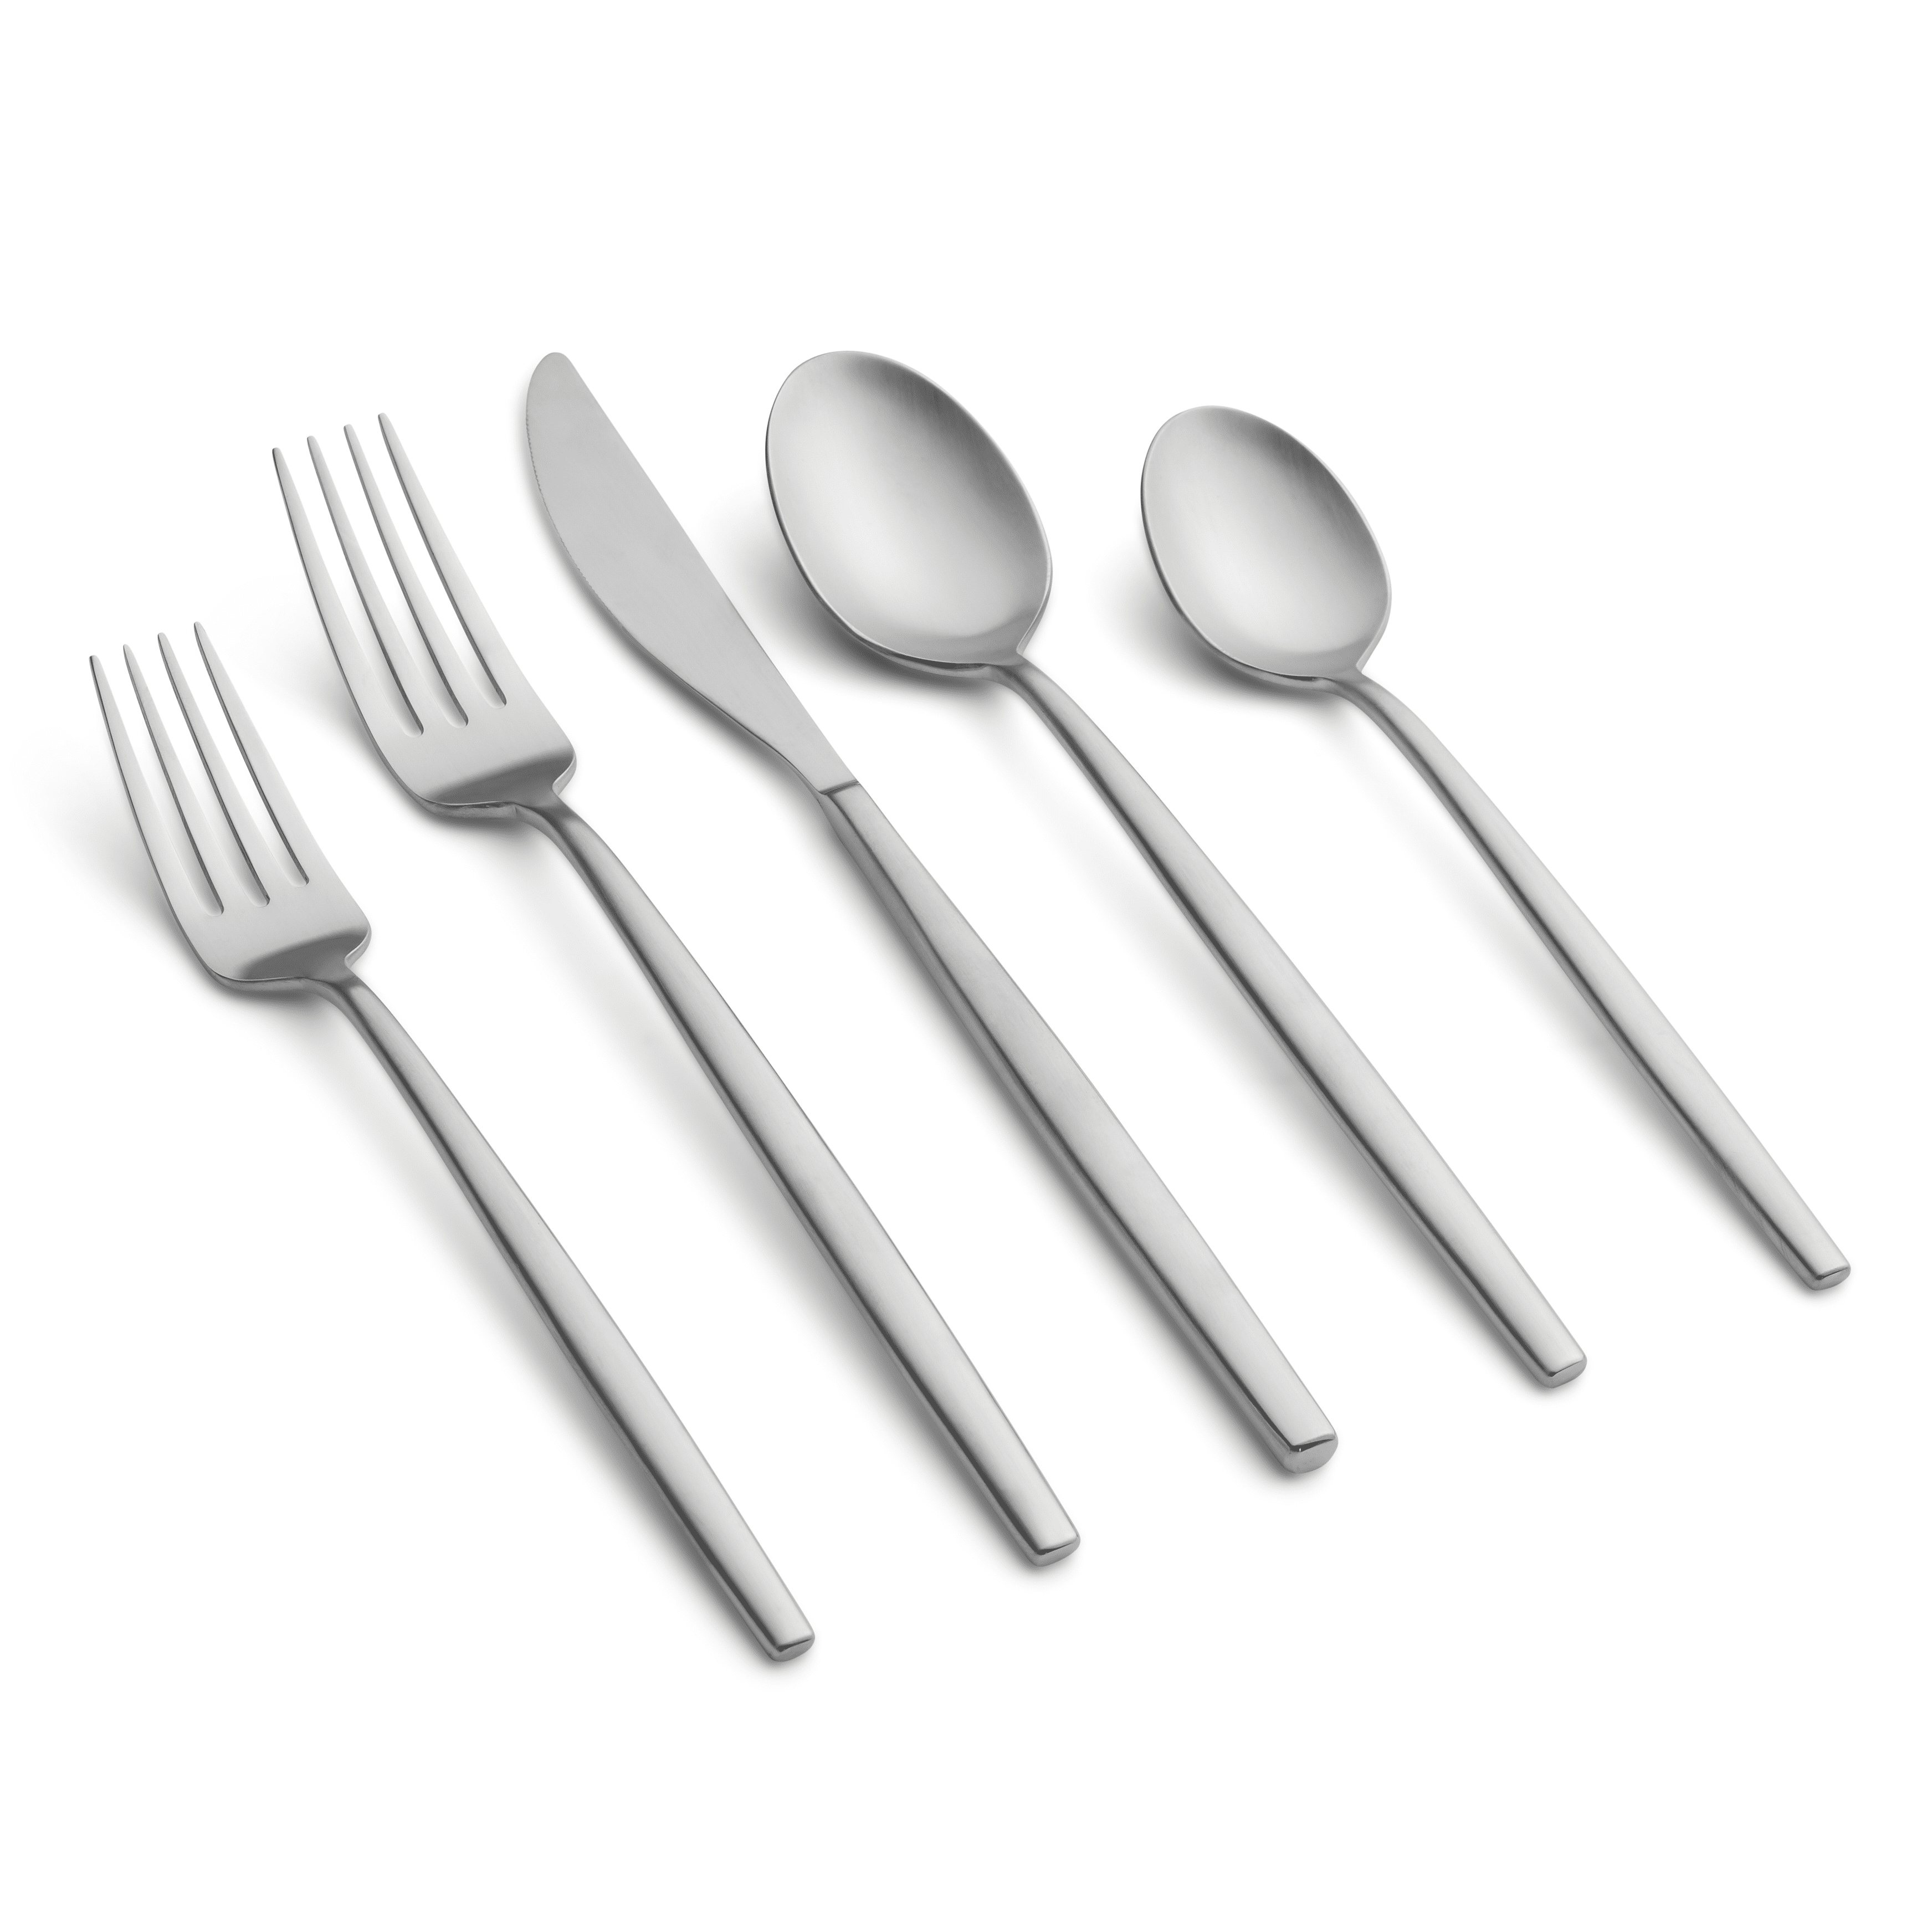 USA SELLER  800 PIECES WINDSOR FLATWARE 18/0 STAINLESS FREE SHIPPING US ONLY 